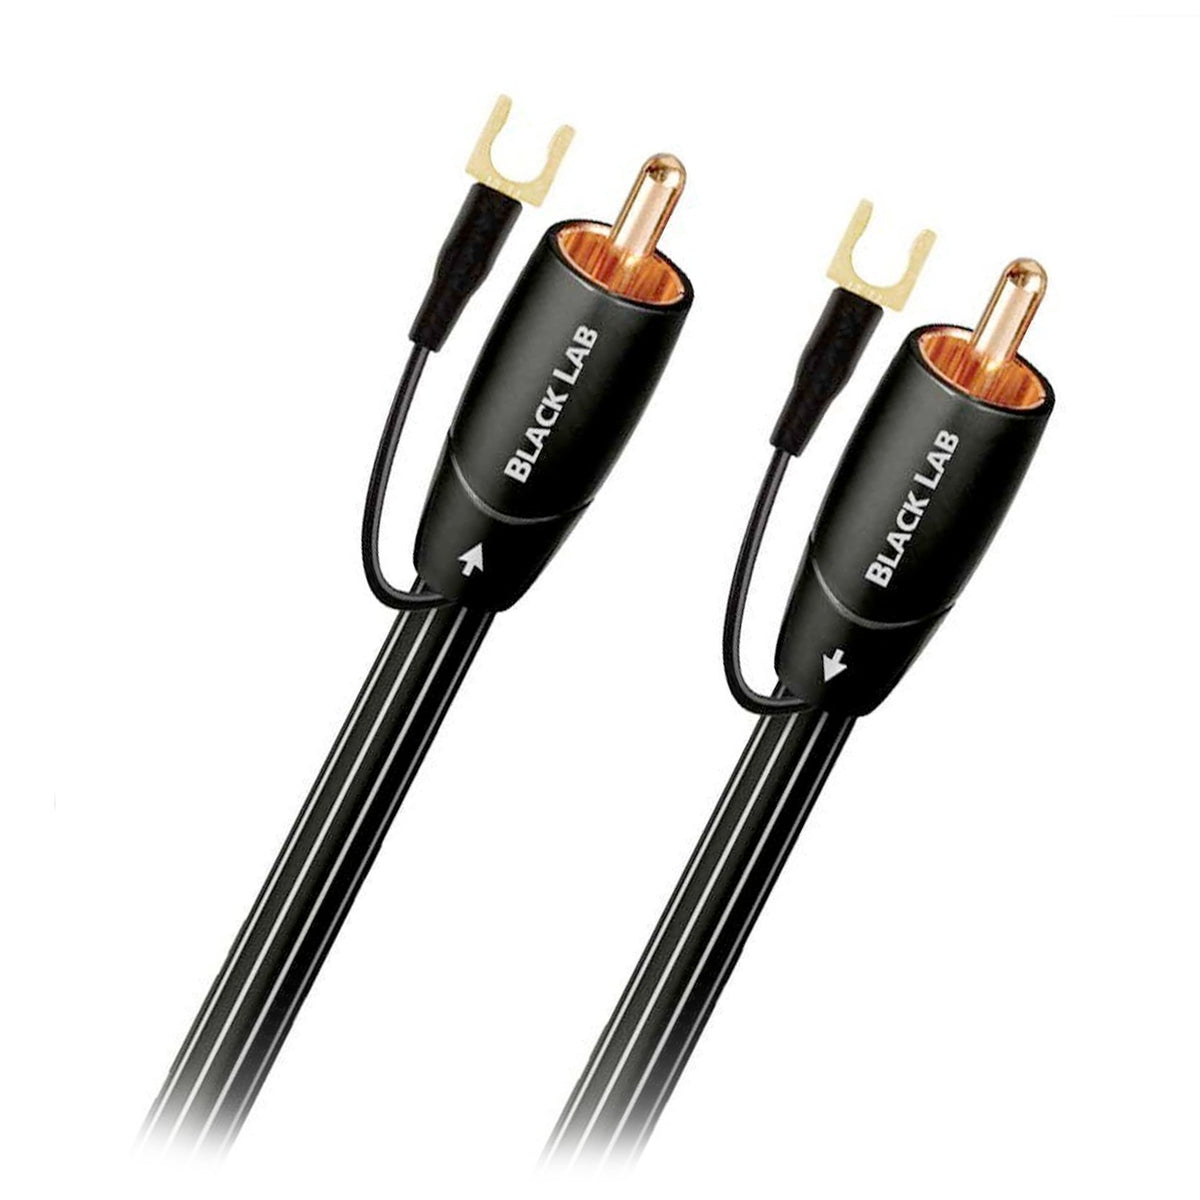   Basics 3.5mm Aux Audio Cable for Stereo Speaker or  Subwoofer with Gold-Plated Plugs, 4 Foot, Black : Electronics